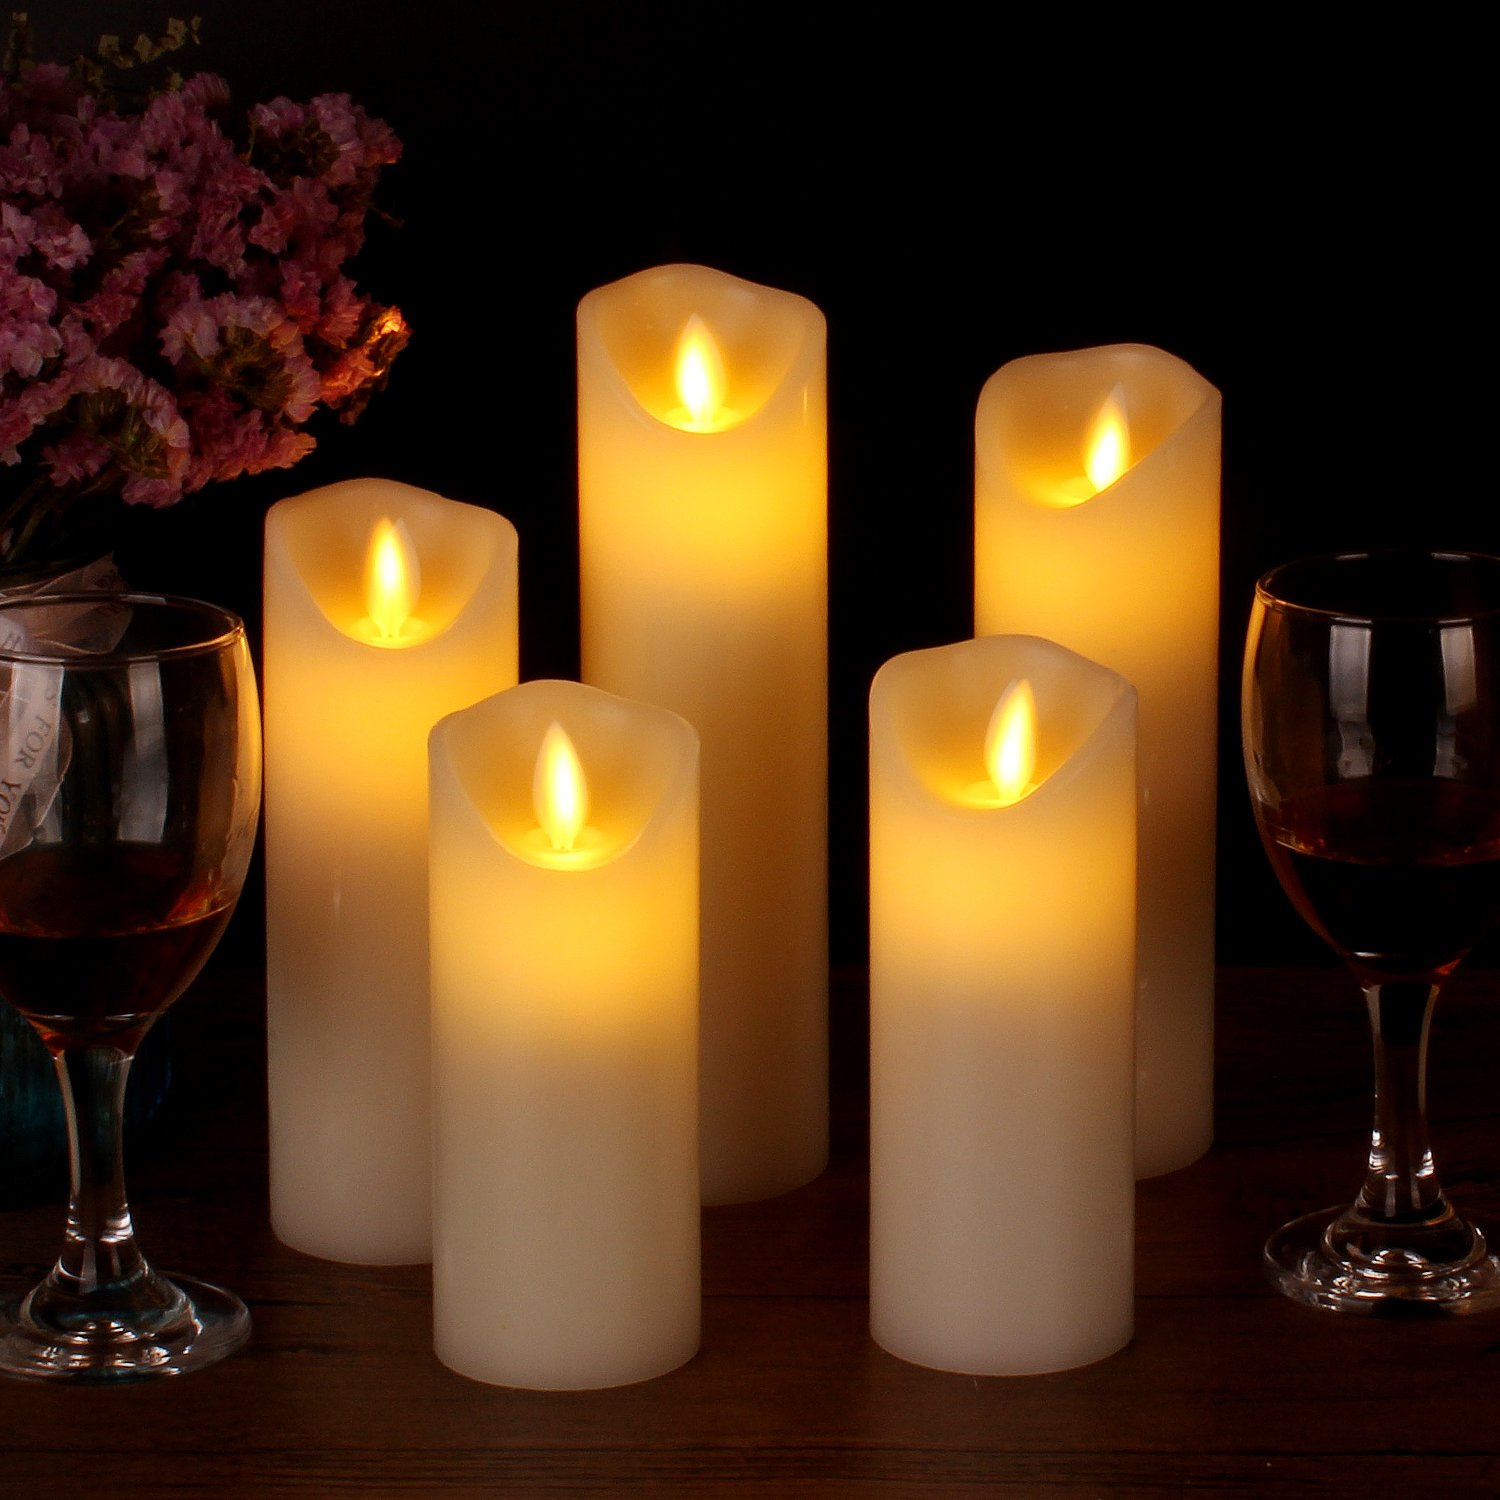 Vinkor Flameless Candles Battery Operated Candles Set Decorative Flameless Candles 4